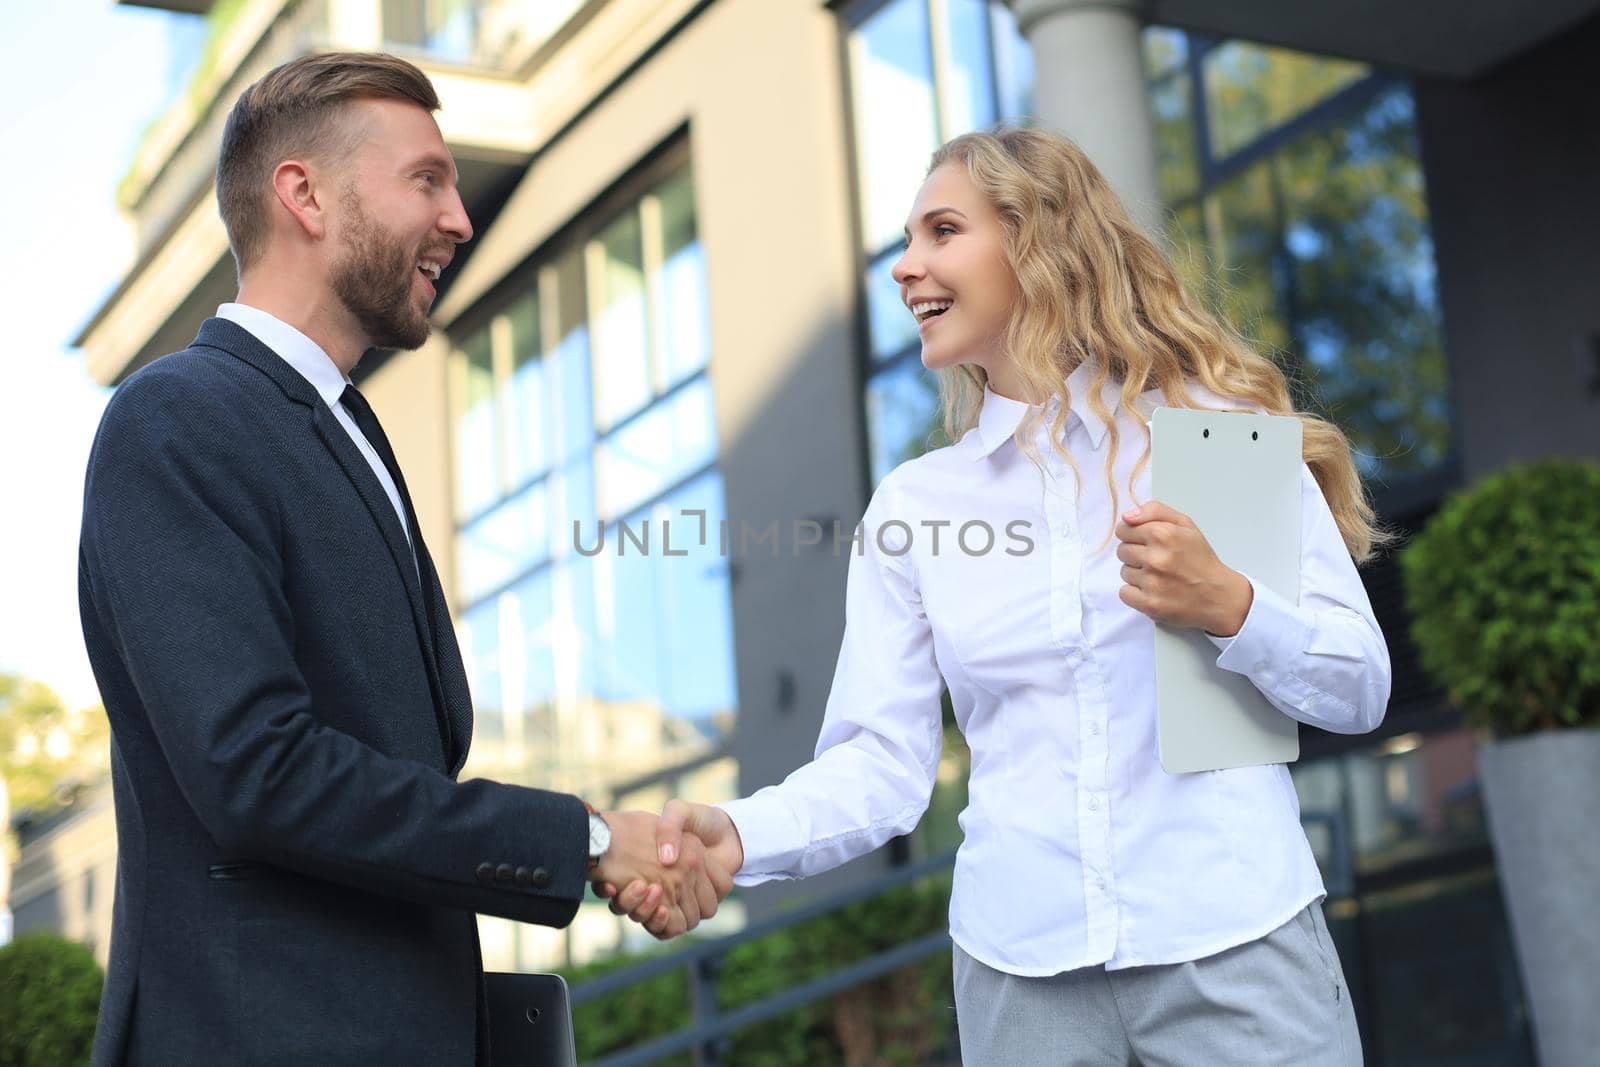 Image of collegues discussing documents and shaking hands near office